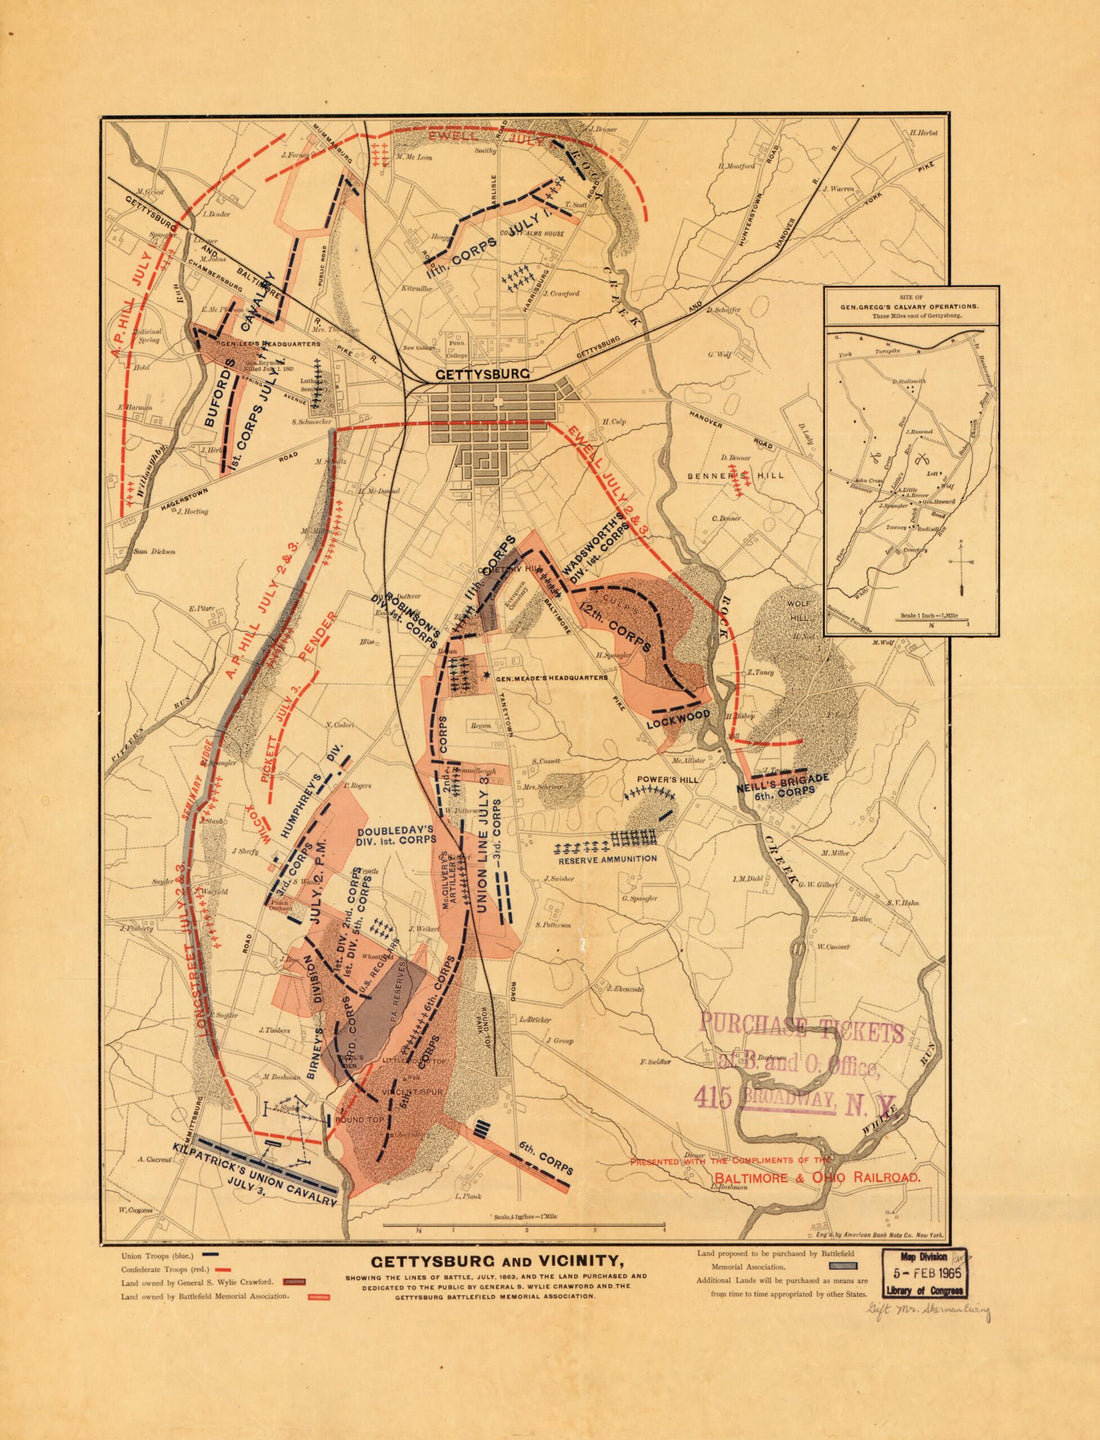 This old map of Gettysburg and Vicinity : Showing the Lines of Battle, July, from 1863, and the Land Purchased and Dedicated to the Public by General S. Wylie Crawford and the Gettysburg Battlefield Memorial Association was created by James T. (James Tho